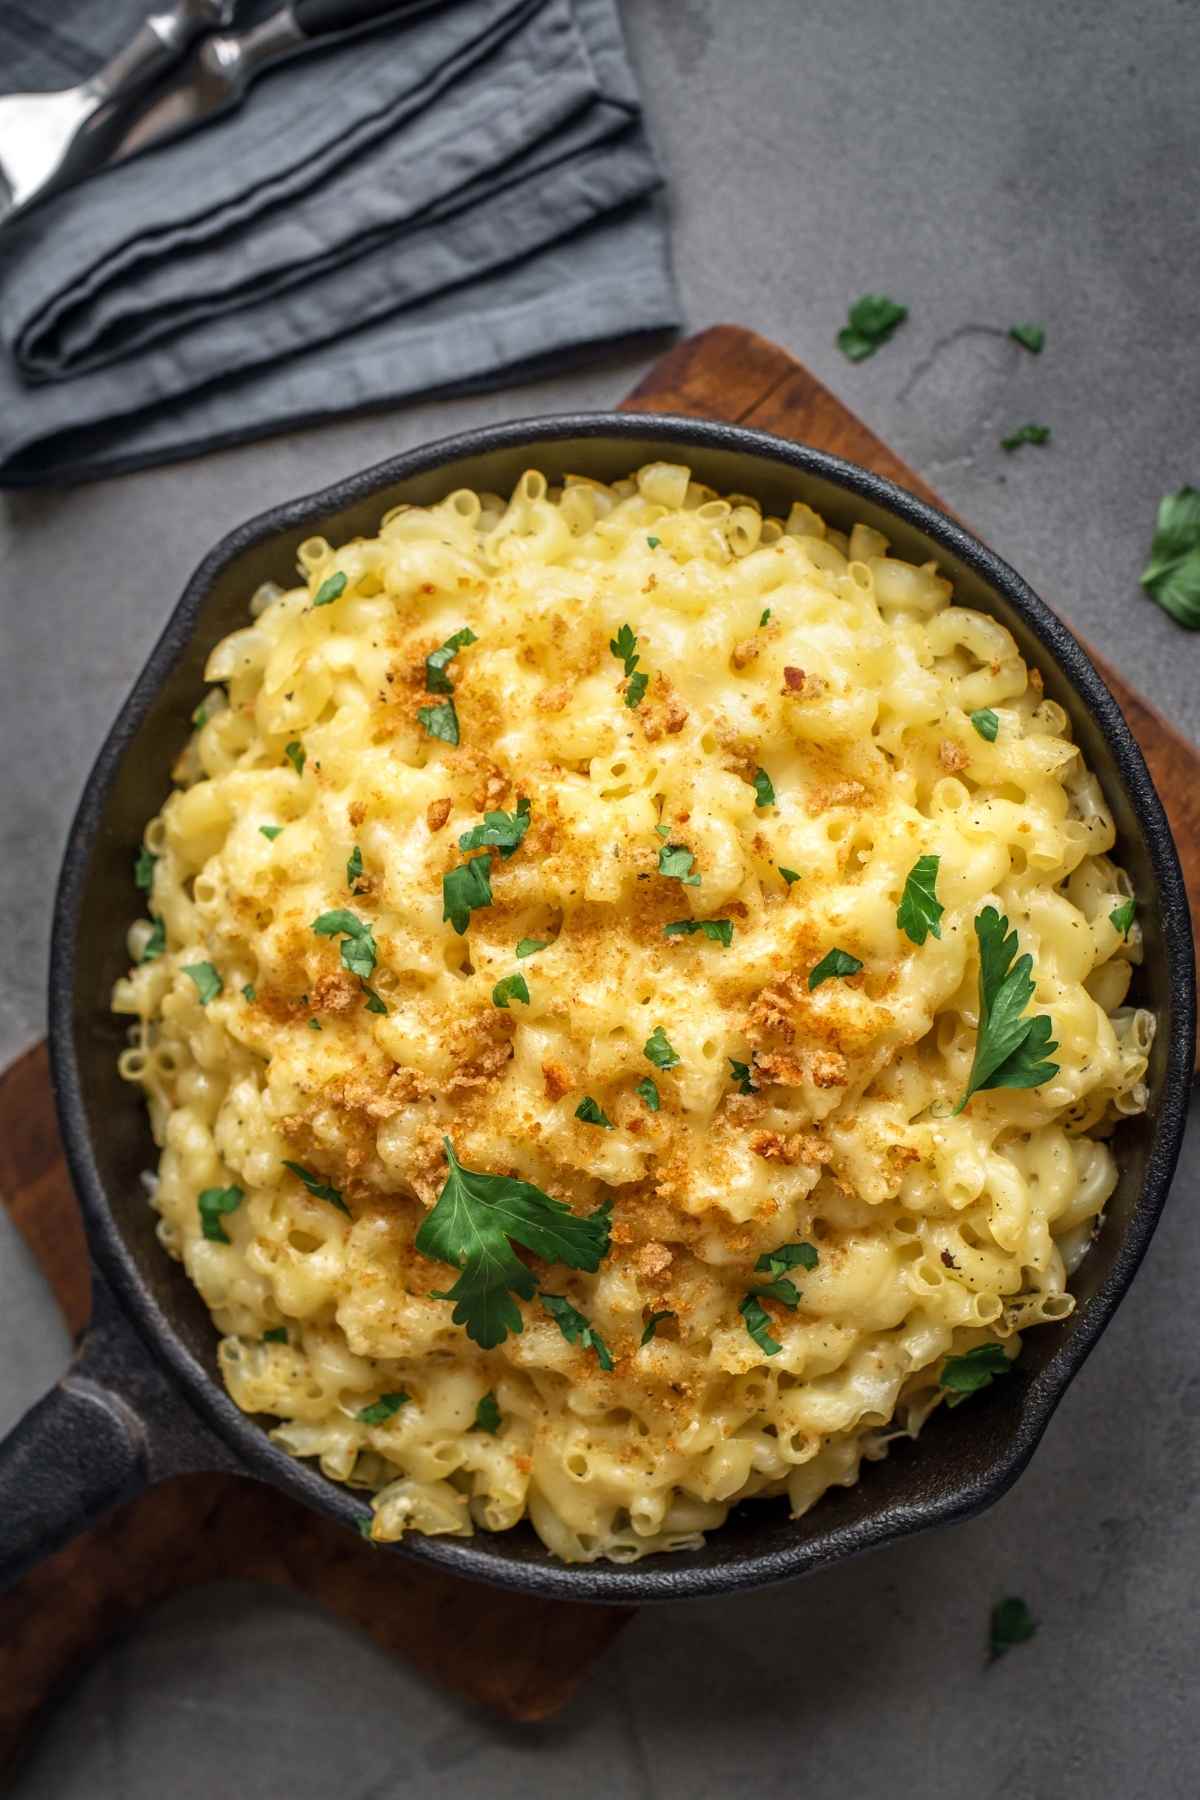 If you’re looking for a meal to treat yourself or someone else, this dish should do the trick. Truffle Mac and Cheese is like nothing you’ve ever tasted! It’s perfect for special occasions and celebrations, or a cozy night at home.